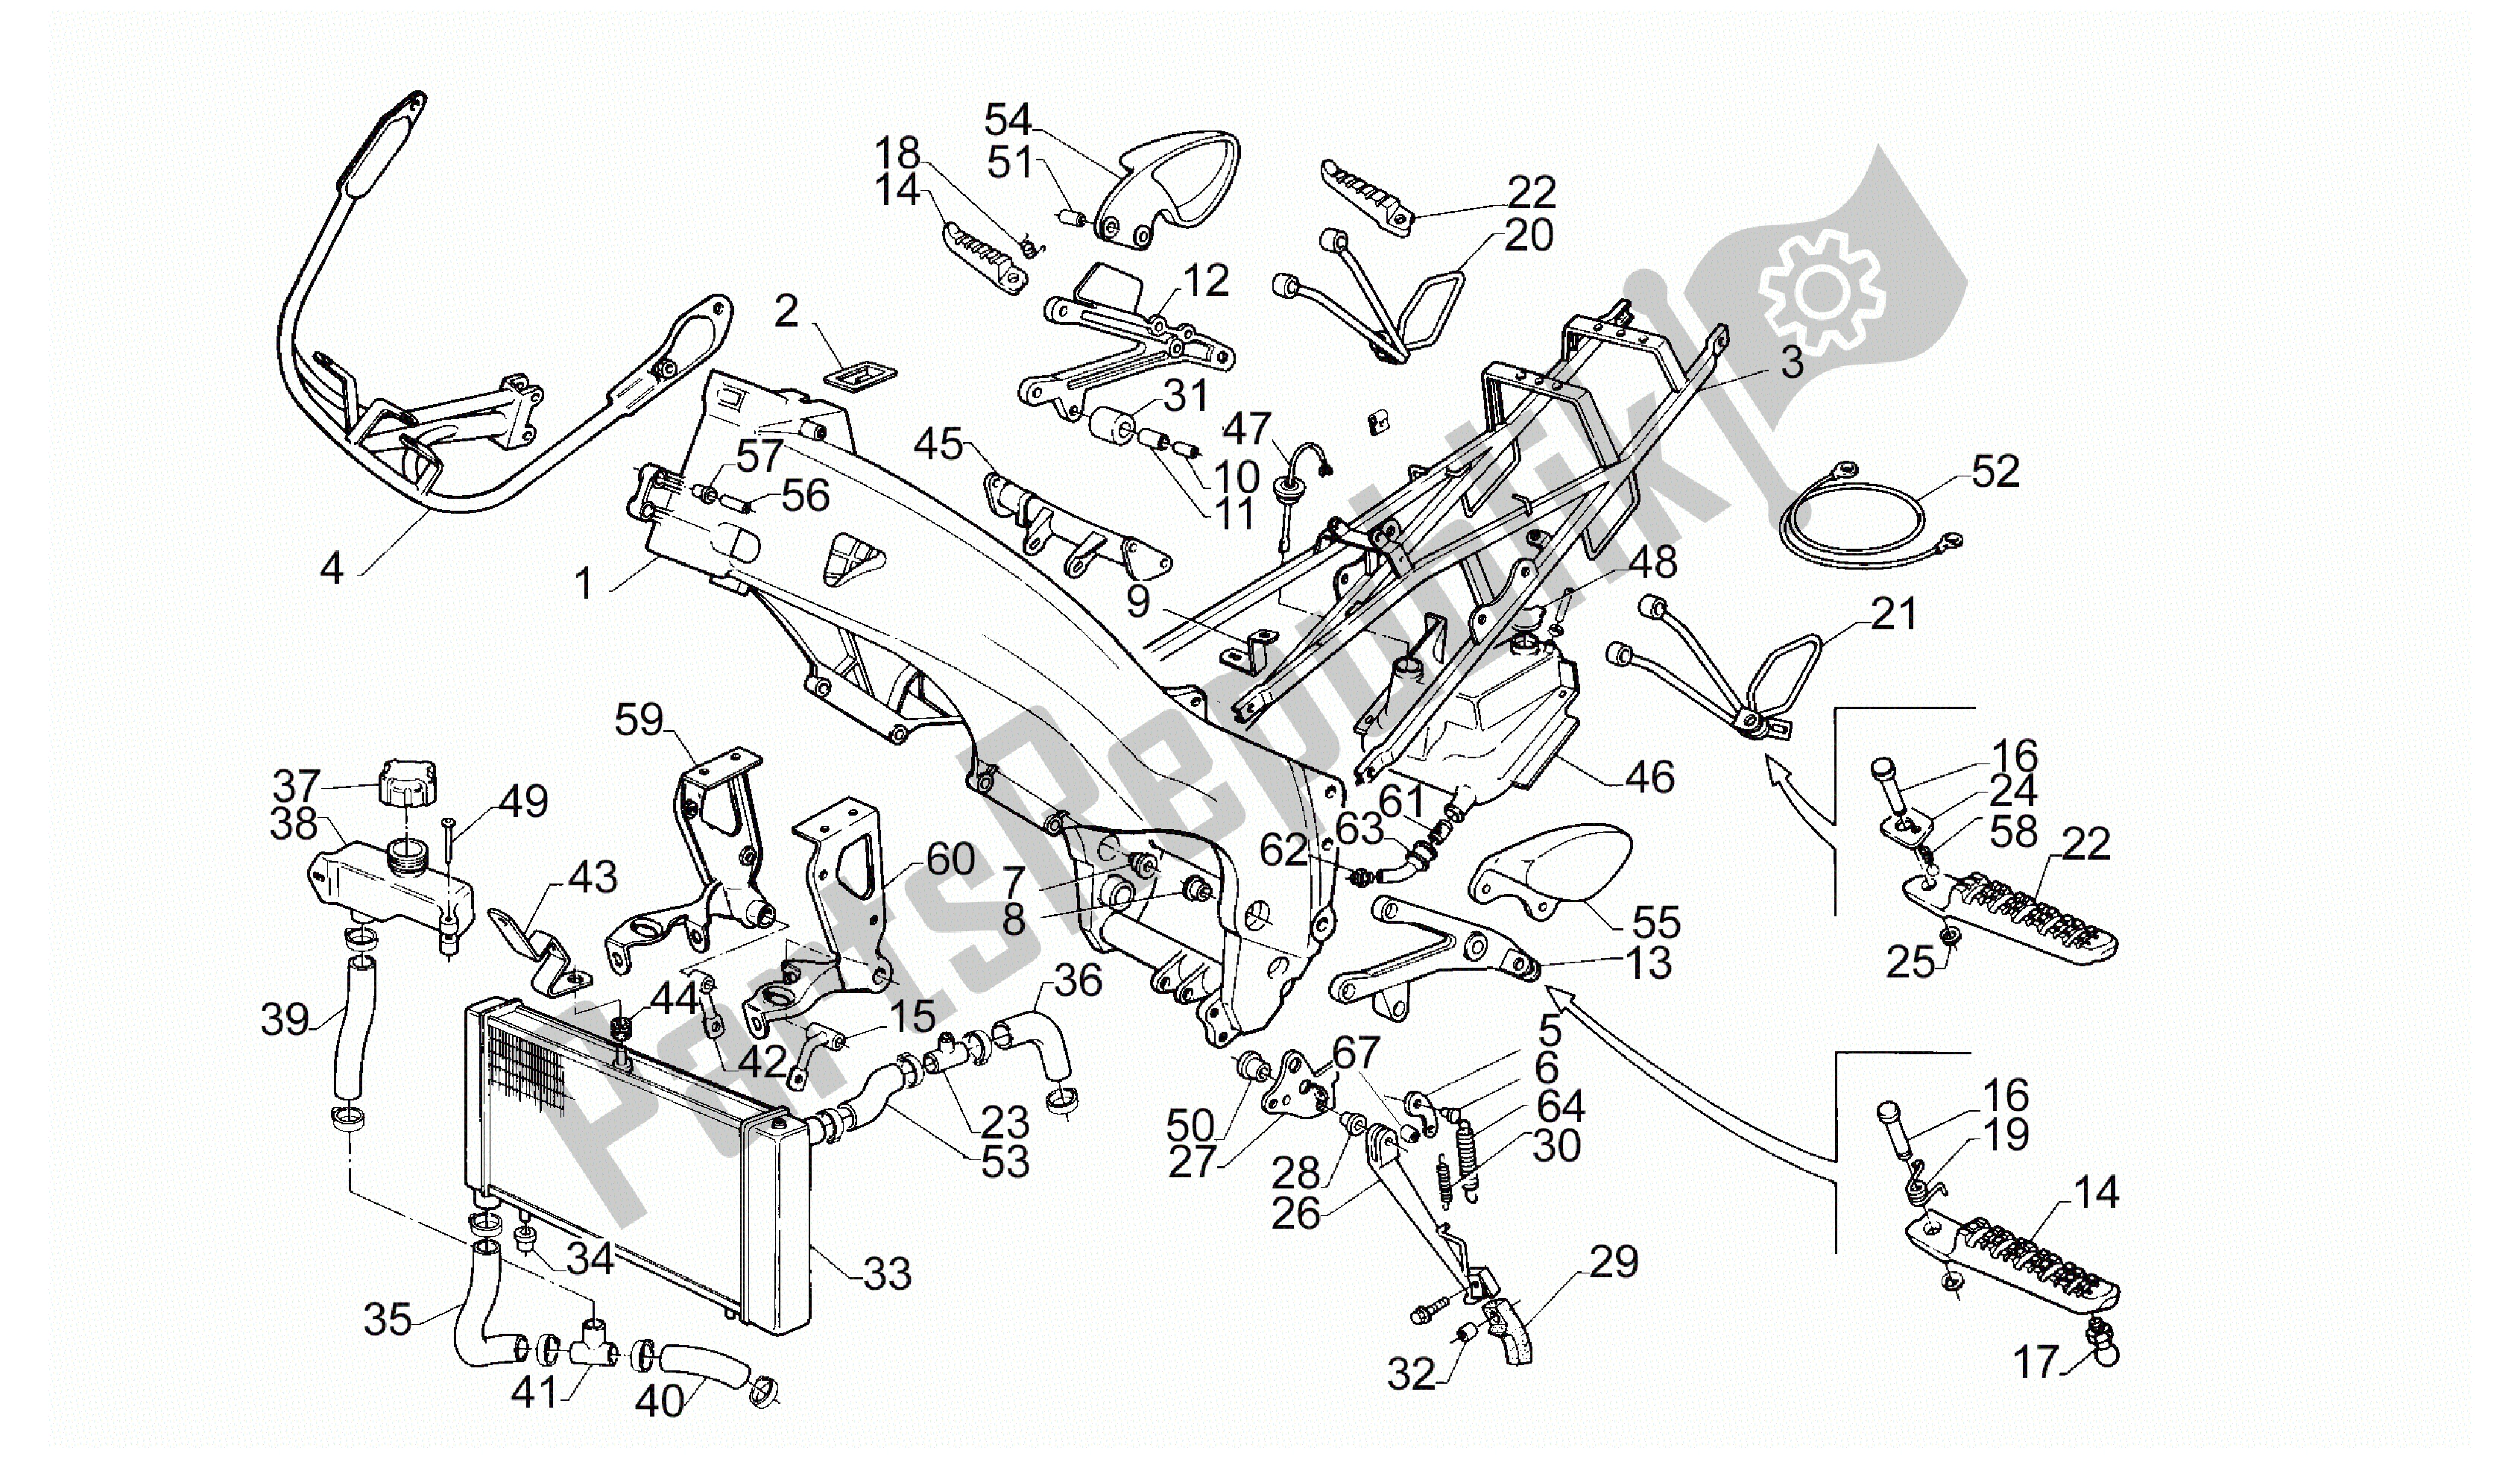 All parts for the Frame of the Aprilia RS 125 1995